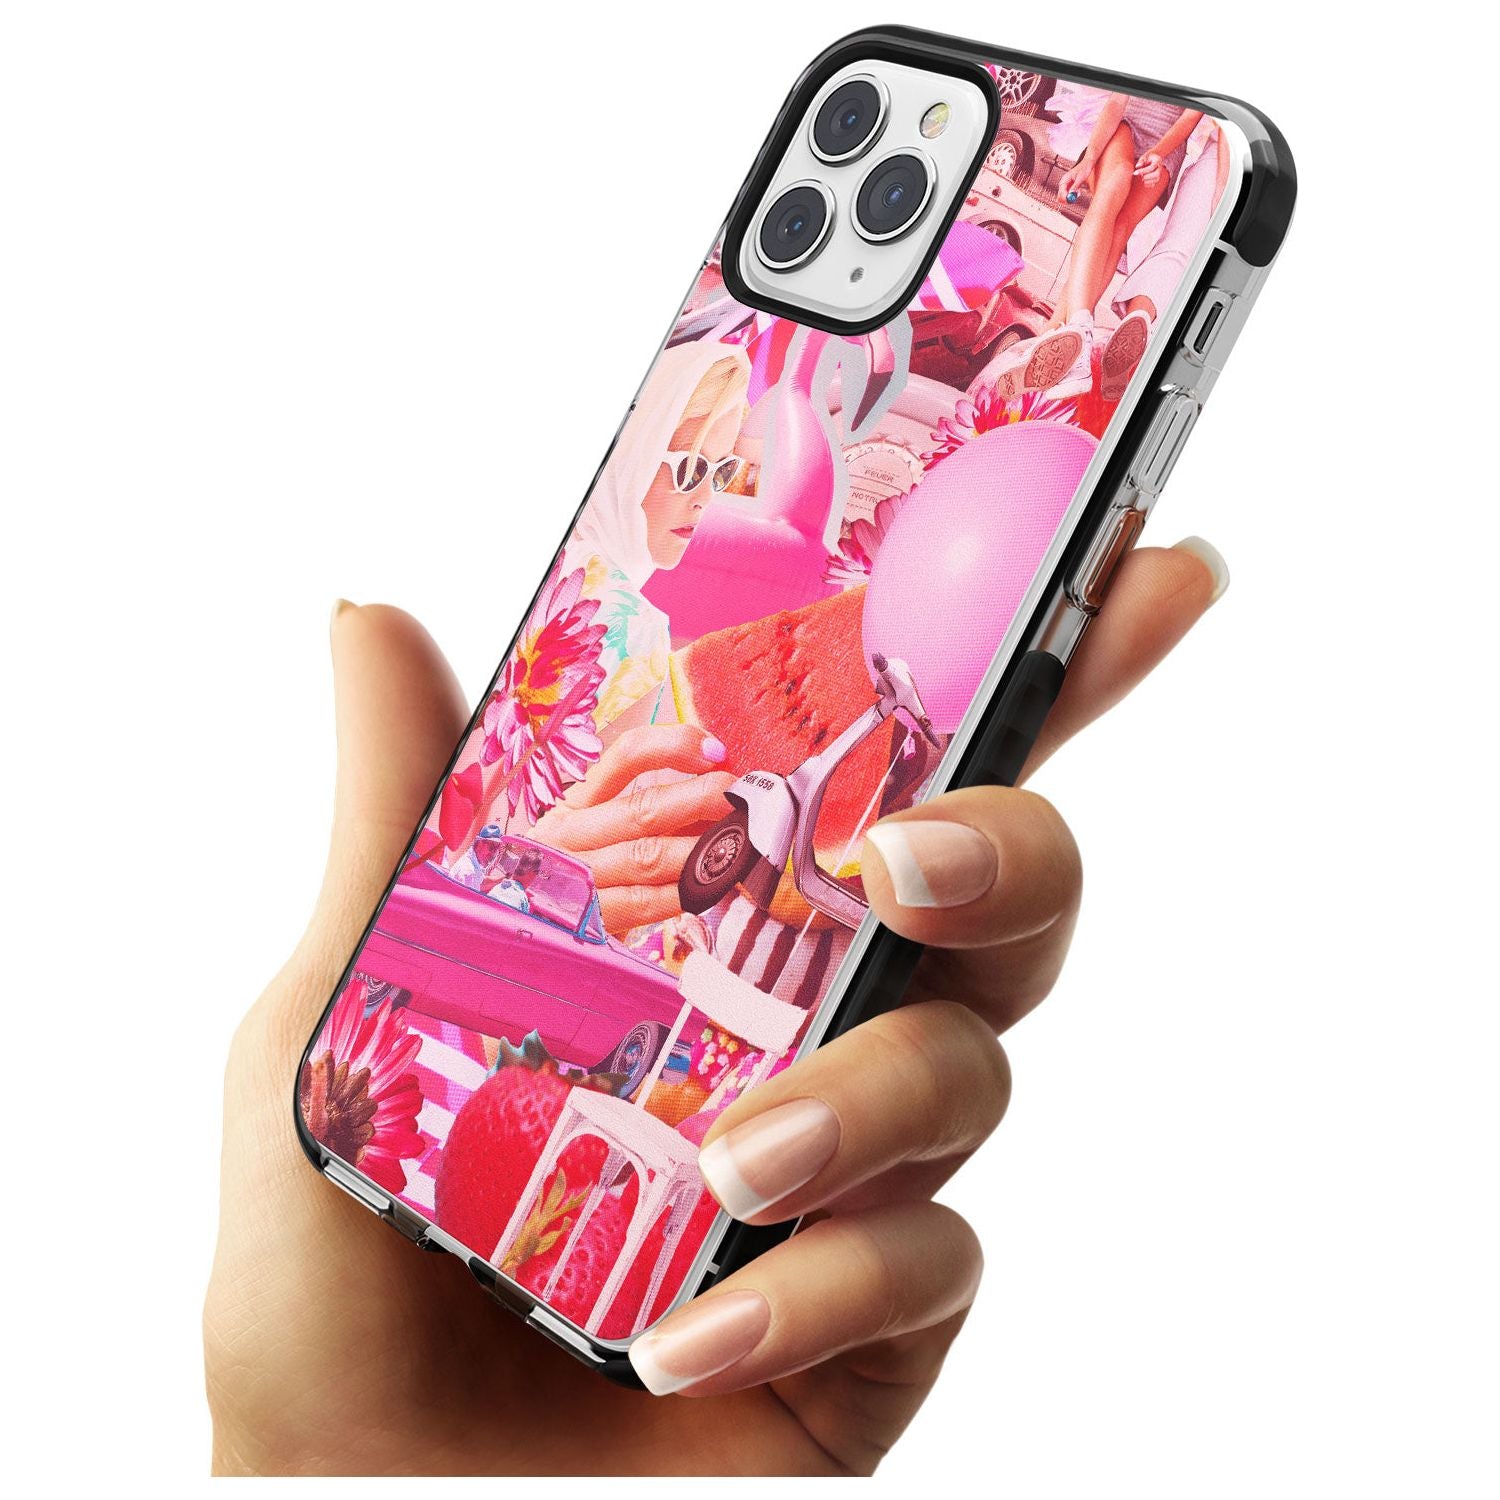 Vintage Collage: Pink Glamour Black Impact Phone Case for iPhone 11 Pro Max